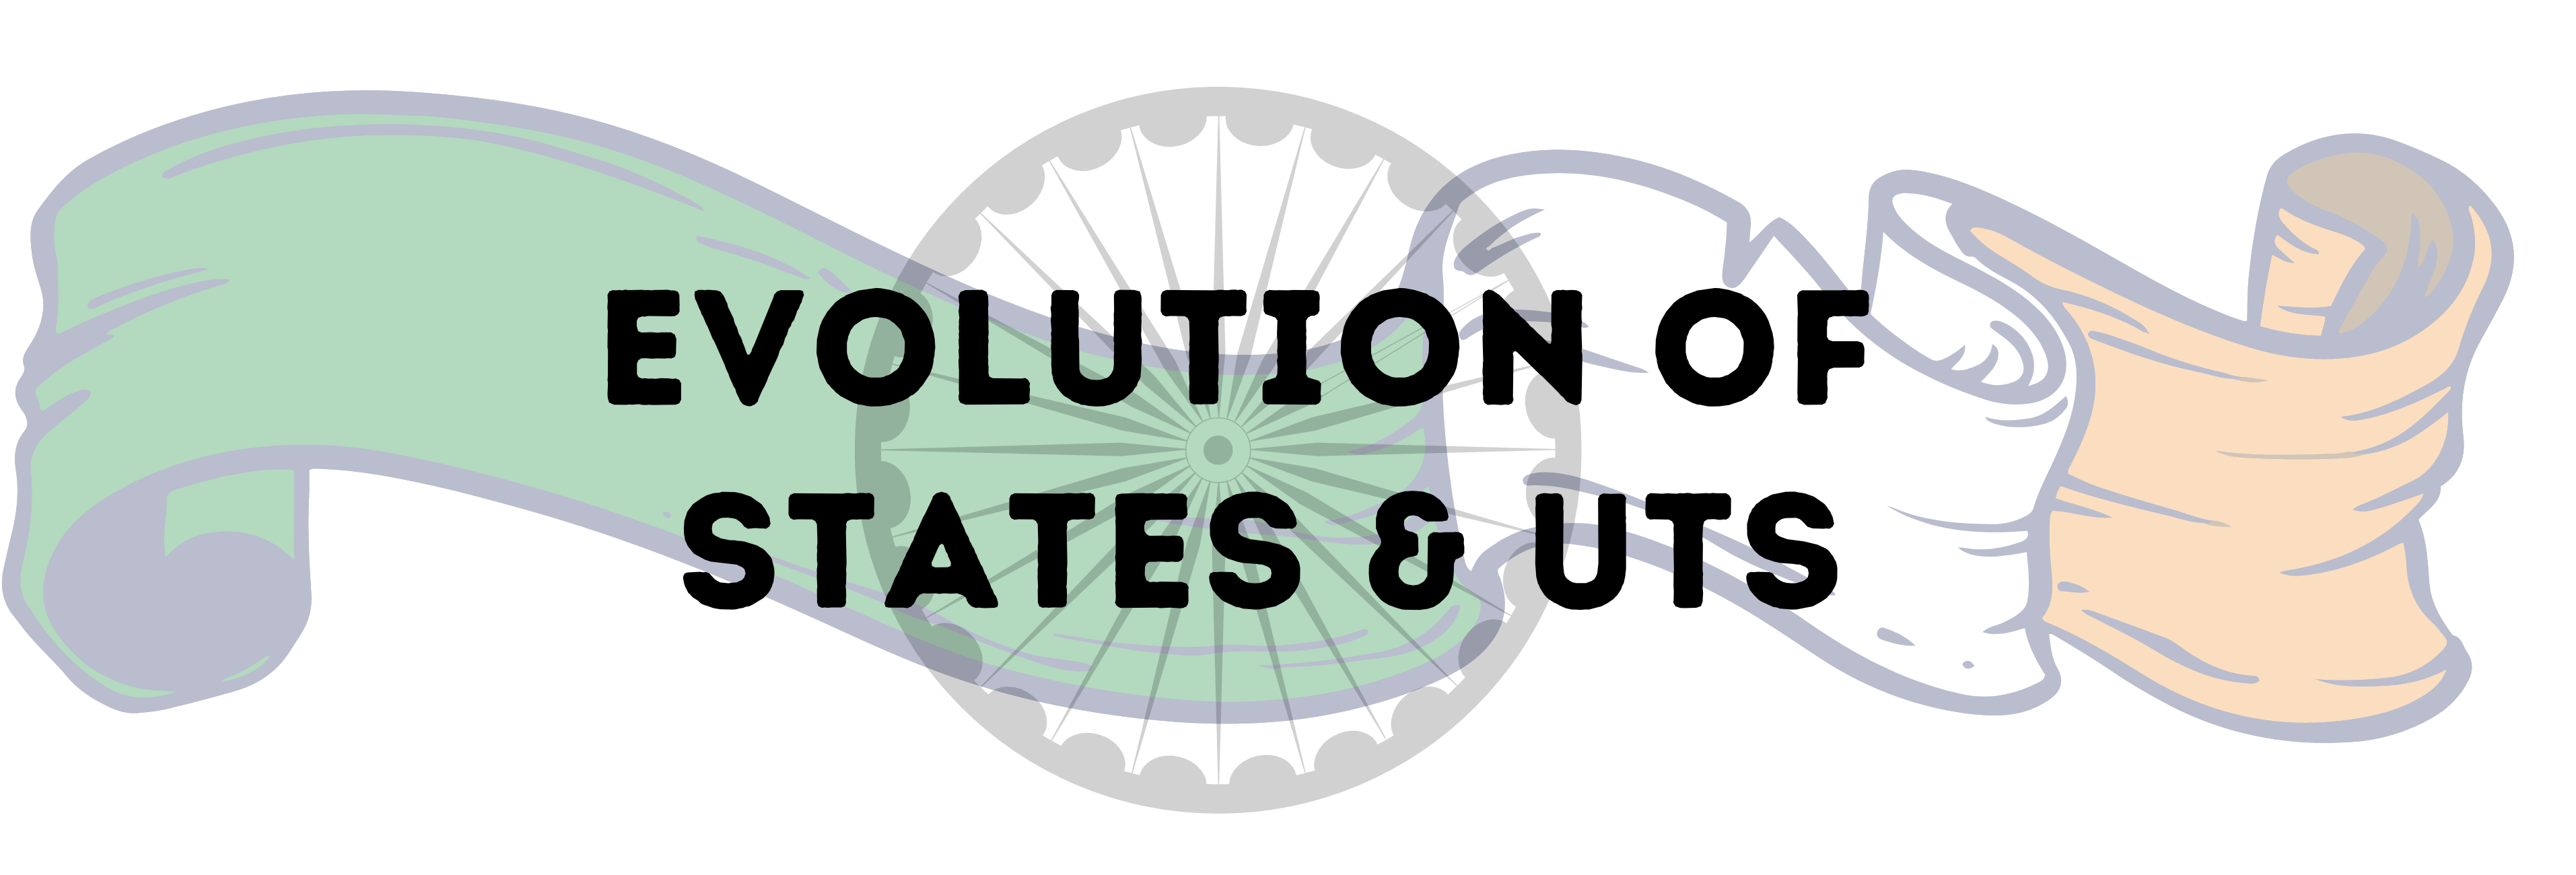 Evolution of Indian States & UTs 